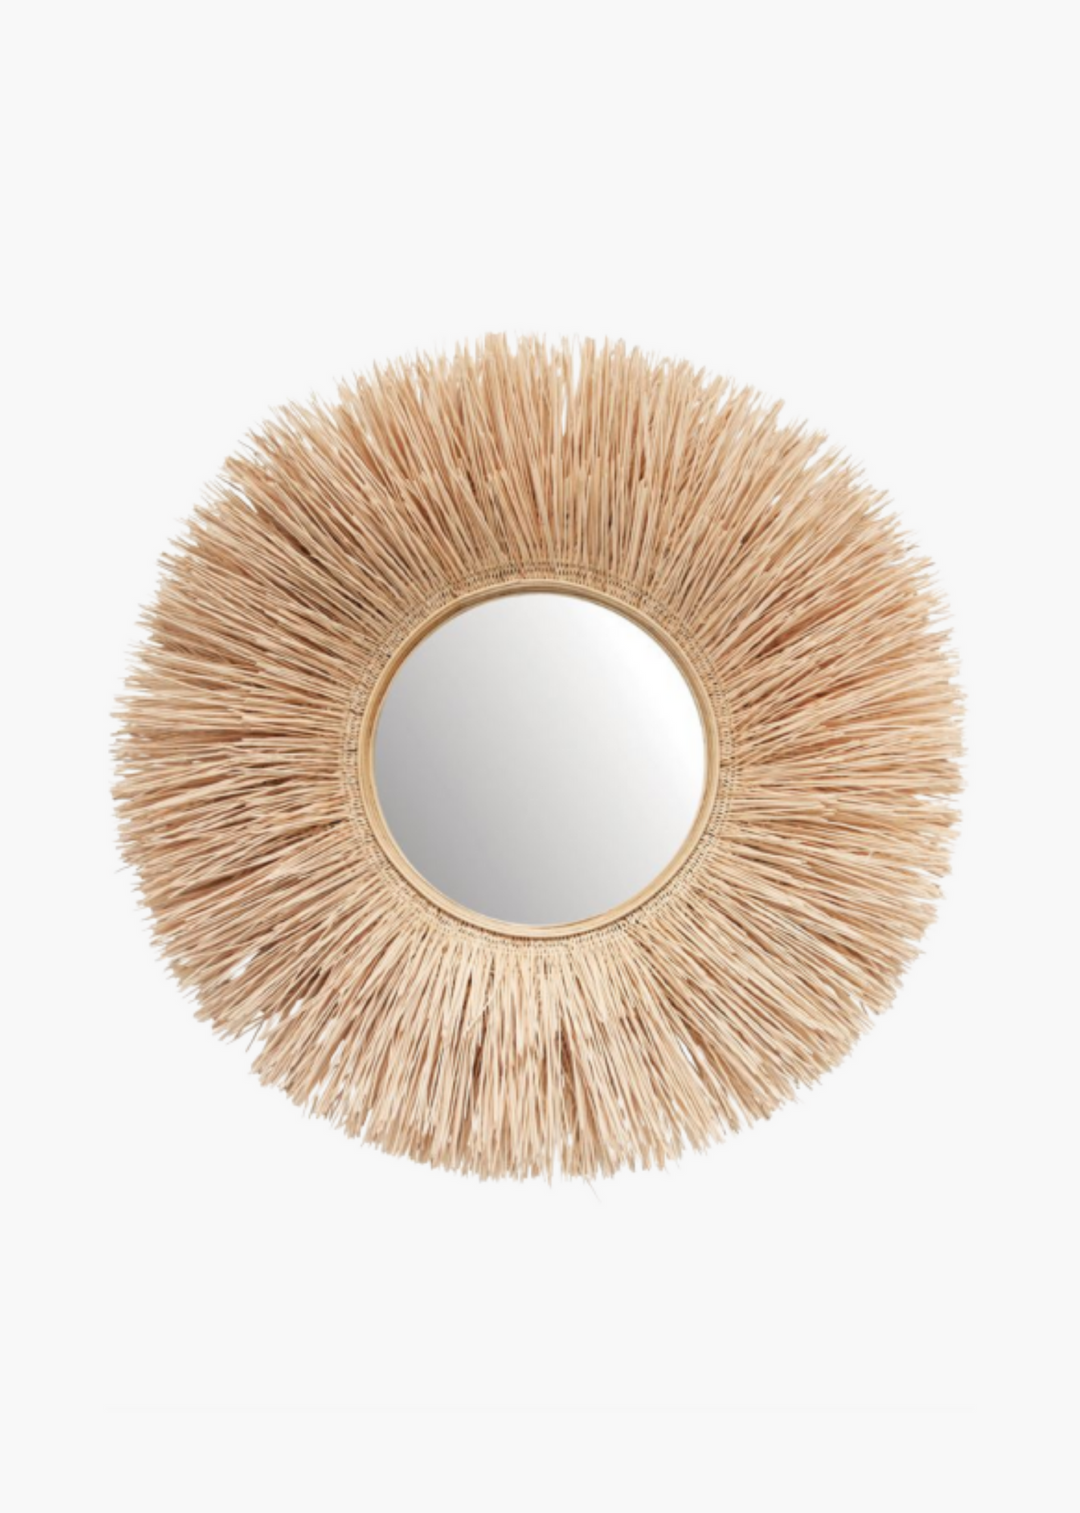 Bleached Whicker Wall Mirror